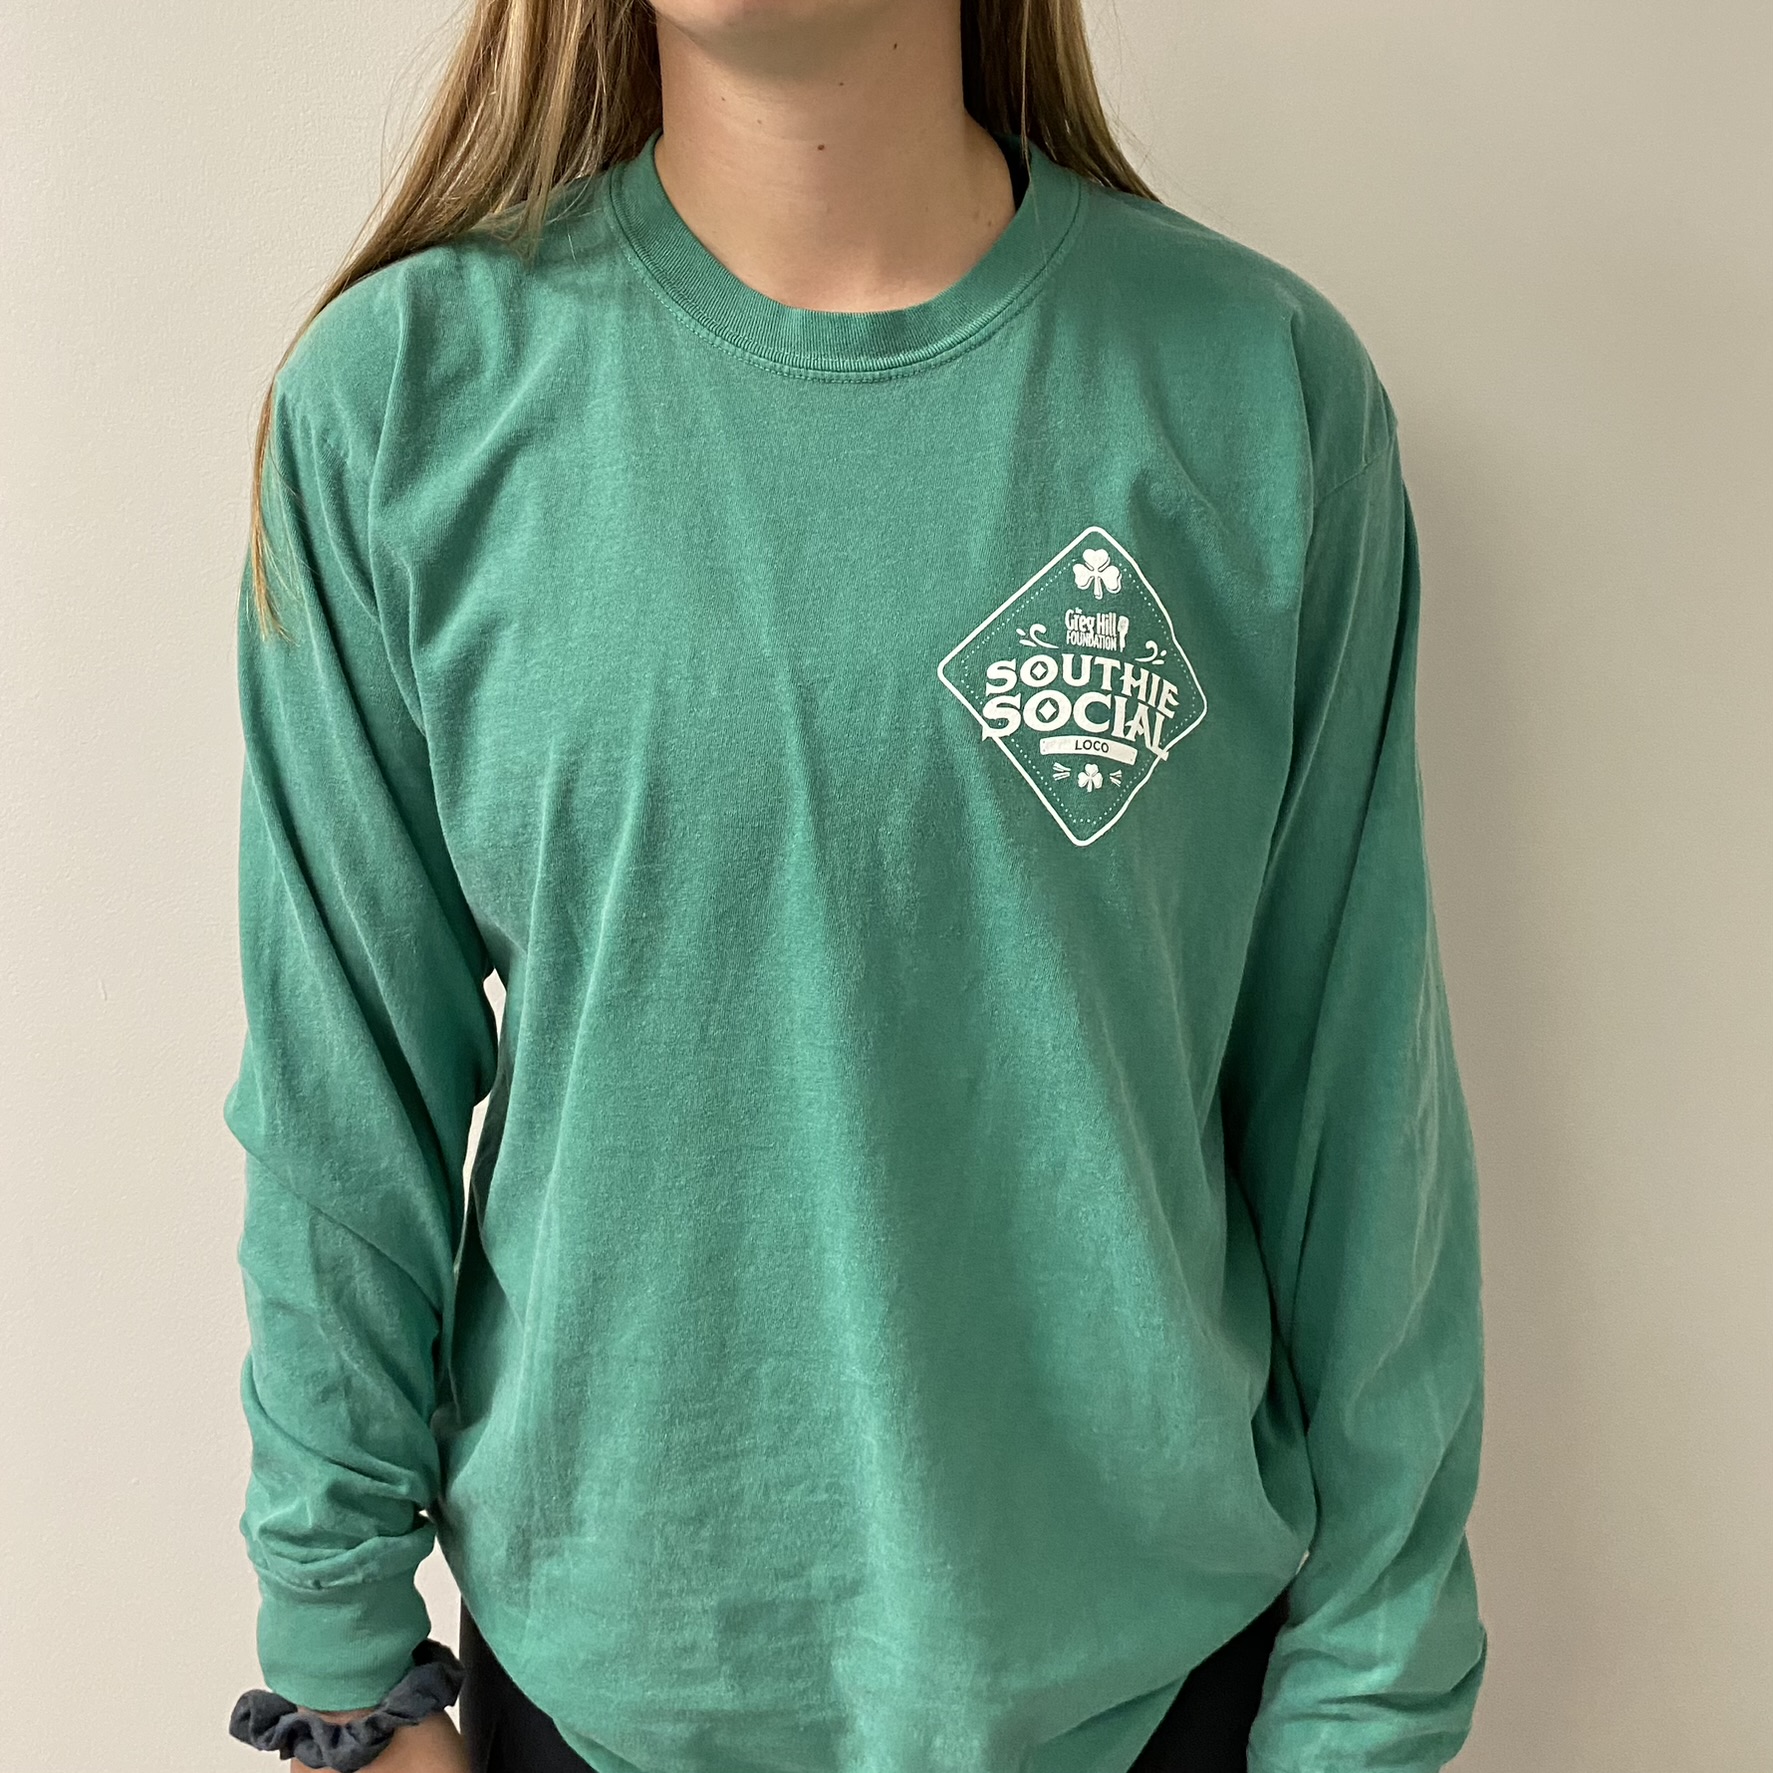 Southie Social Long Sleeve